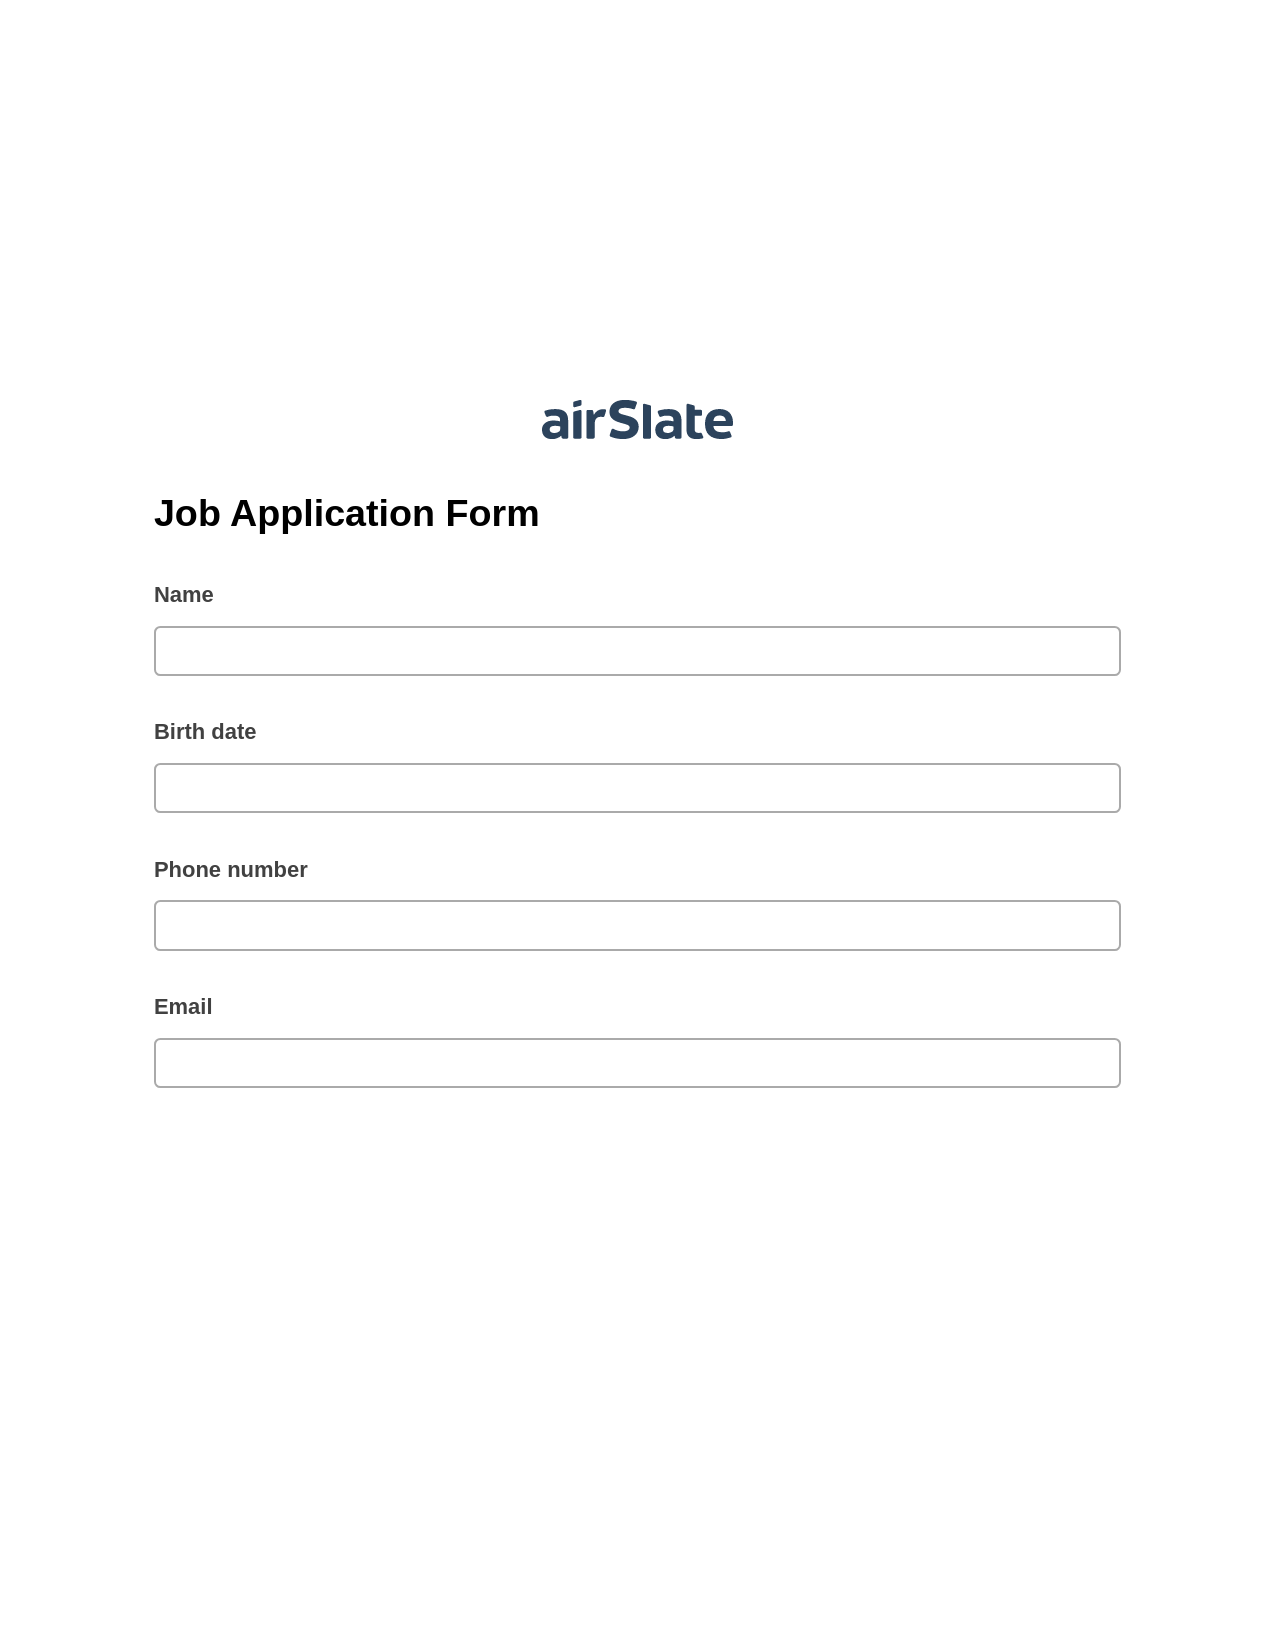 Job Application Form Pre-fill Dropdown from Airtable, Text Message Notification Bot, Export to Google Sheet Bot